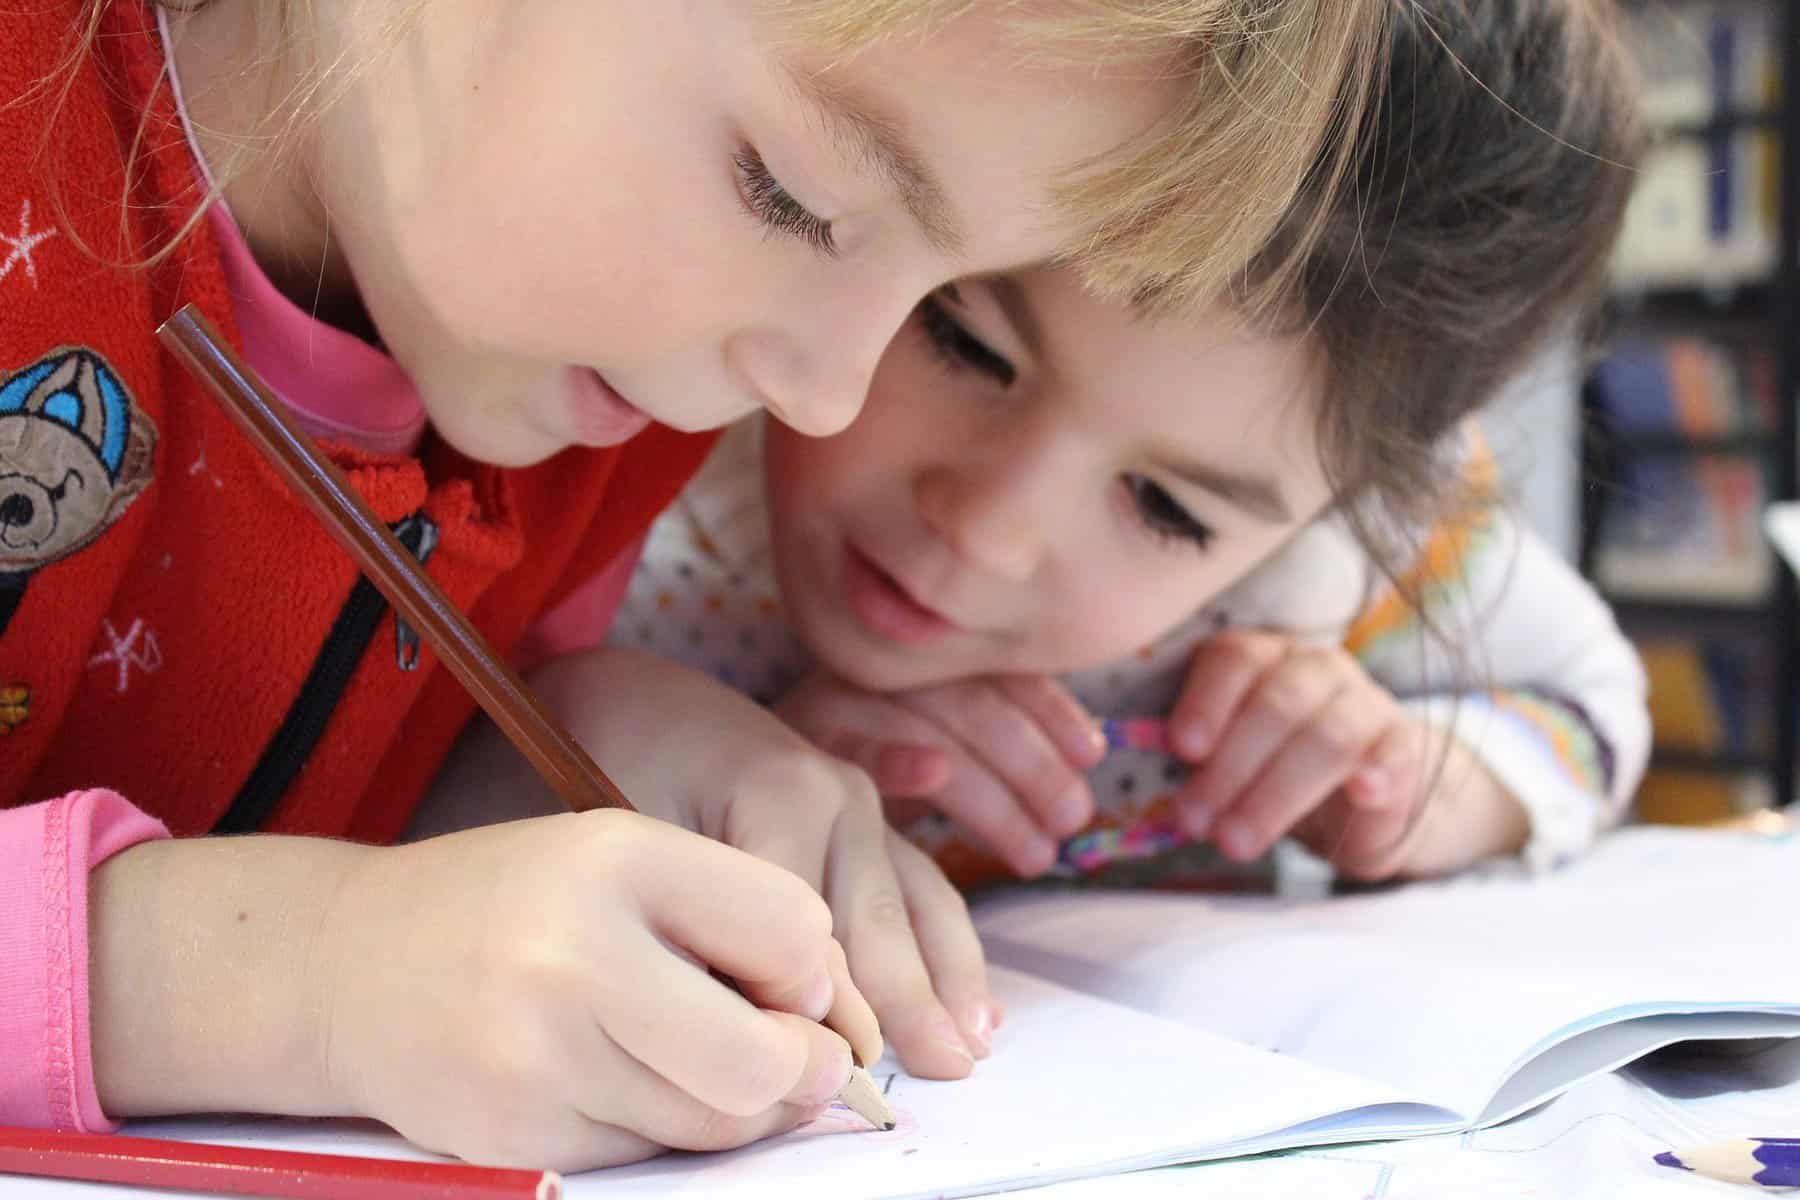 Two young girls are hunched over a book with one holding a pencil and writing.